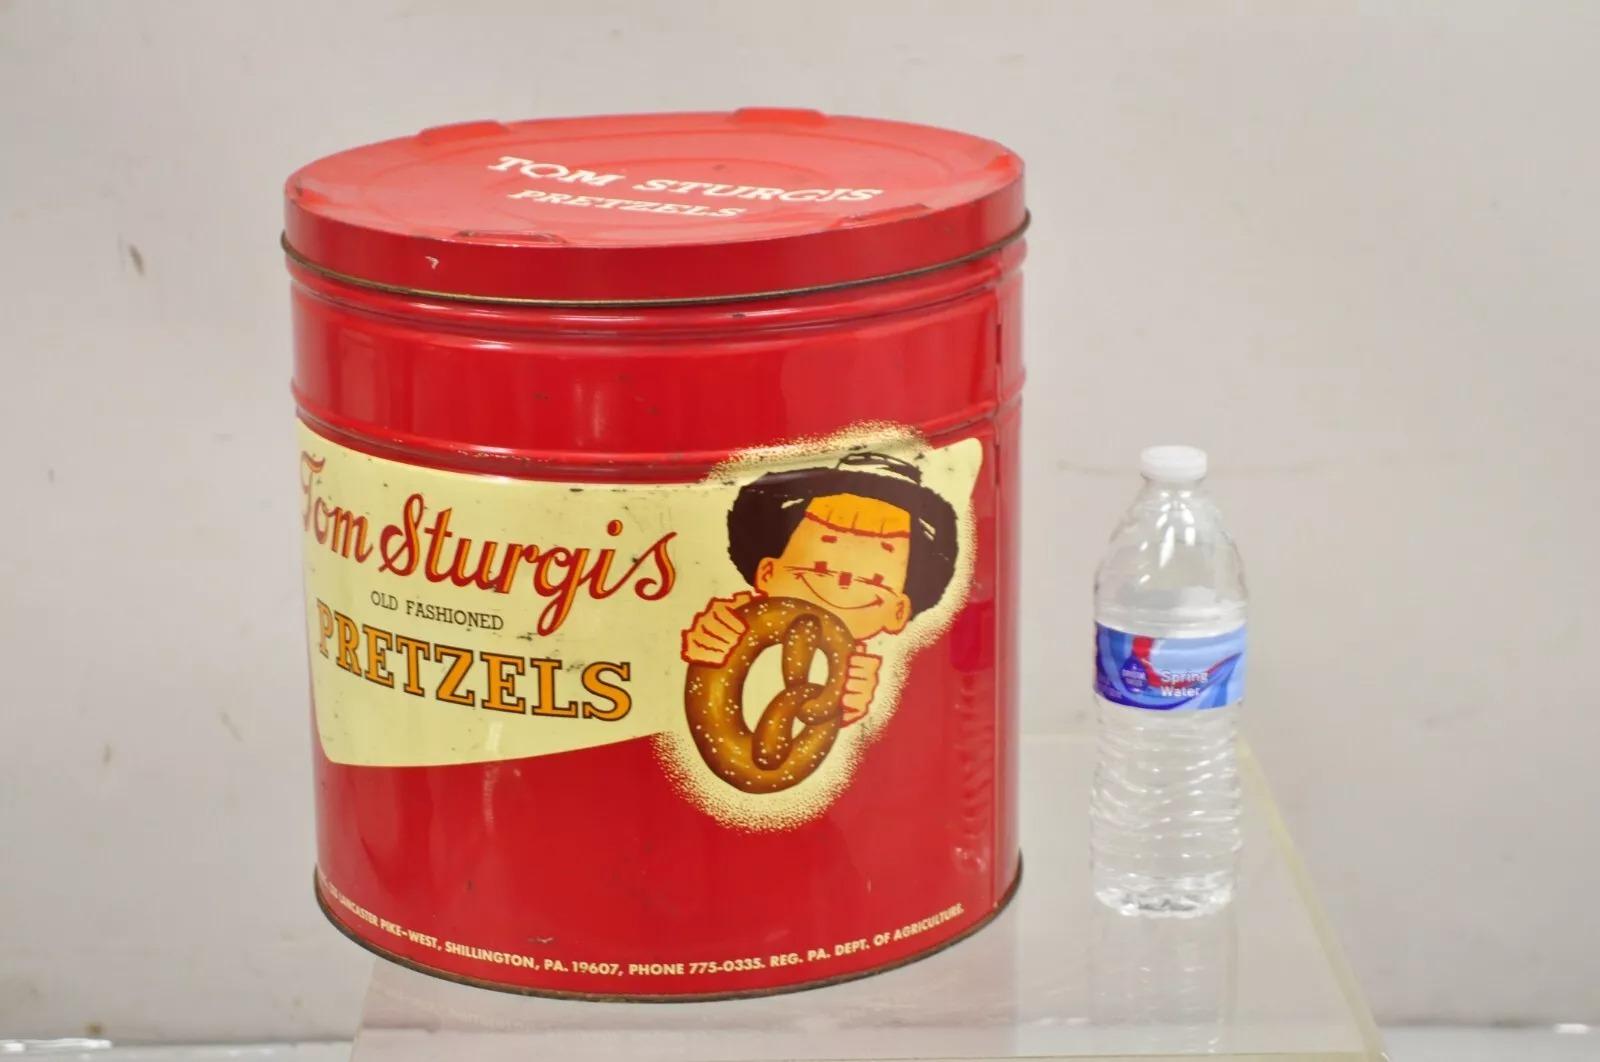 Vintage Tom Sturgis Pretzels Large Tin Metal Red Advertising Can. Circa Early to Mid 20th Century. Dimensions : 12,5